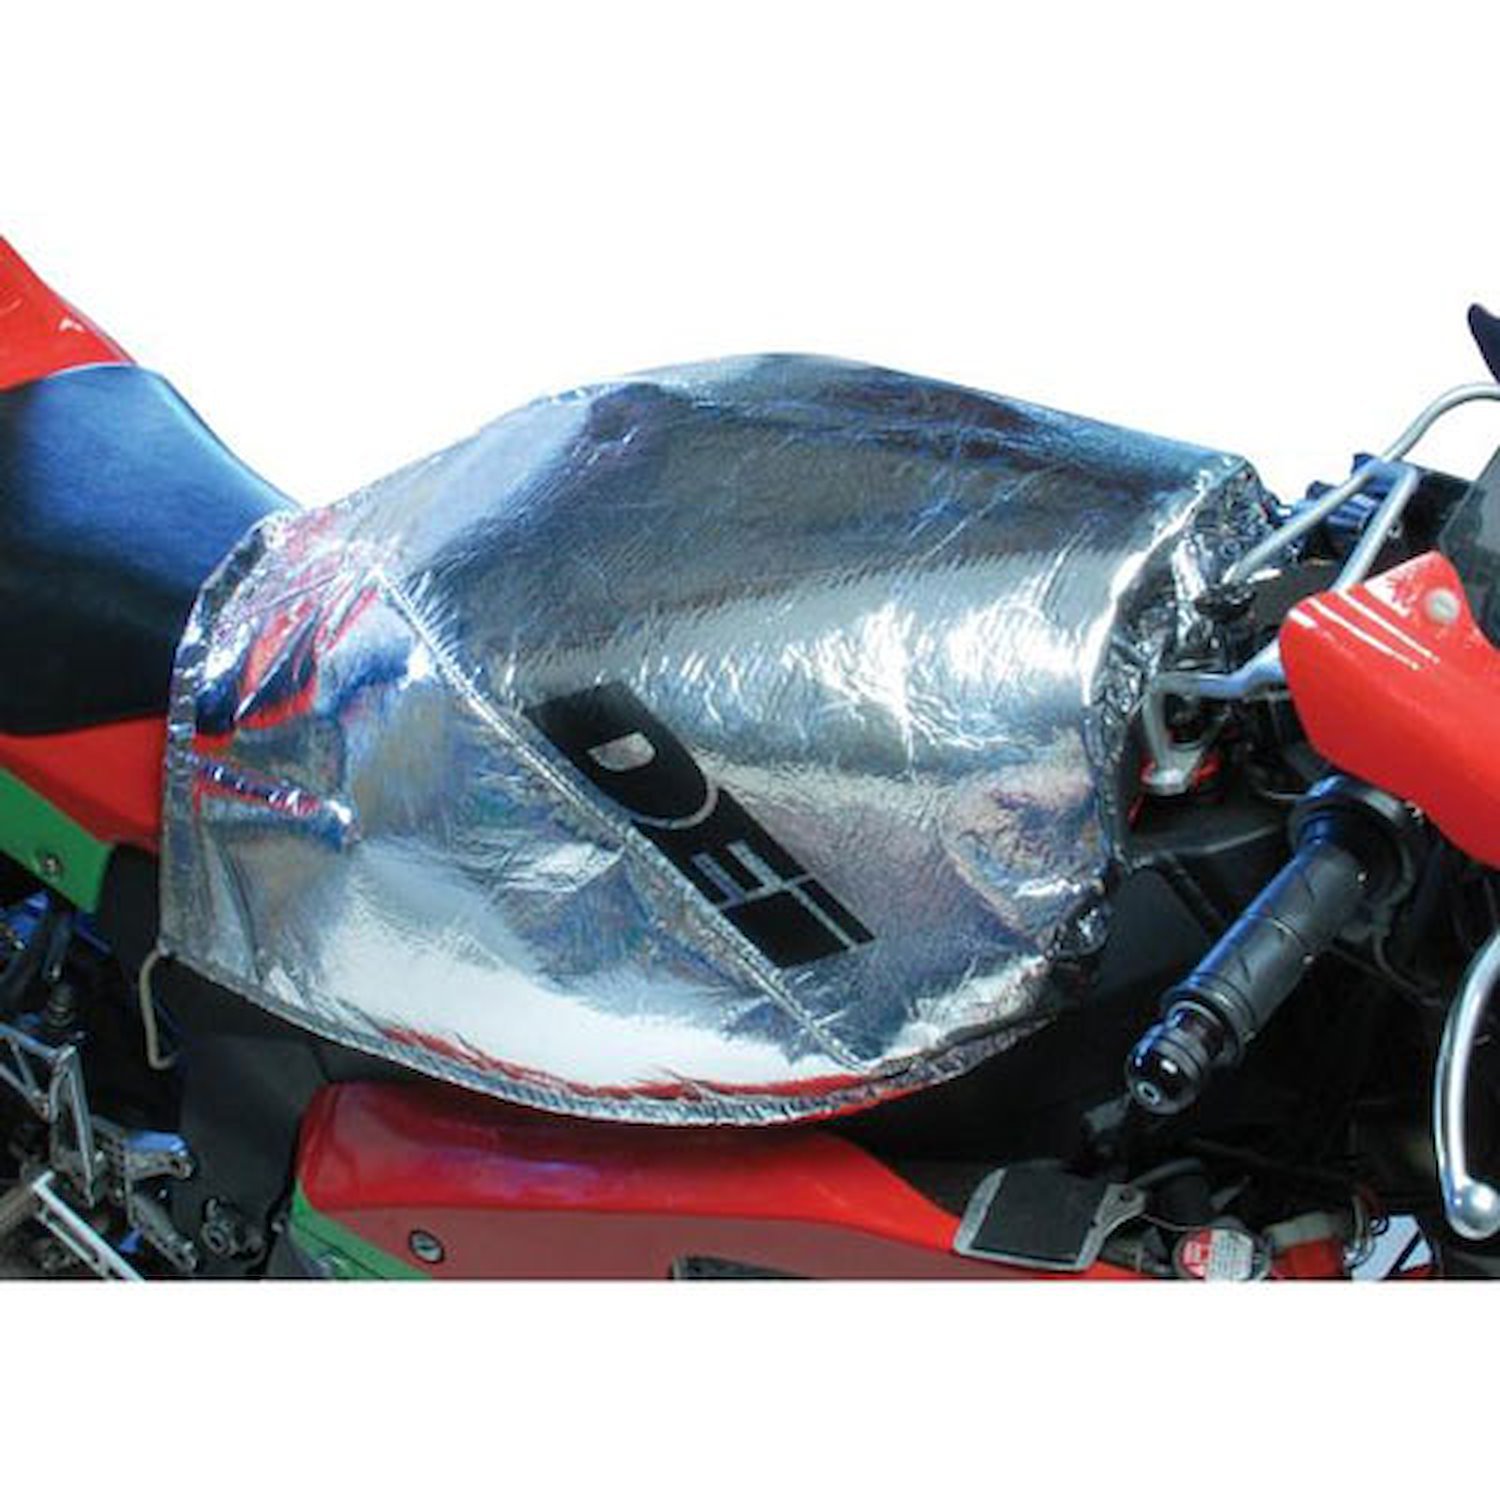 Motorcycle Fuel Tank Cover Universal